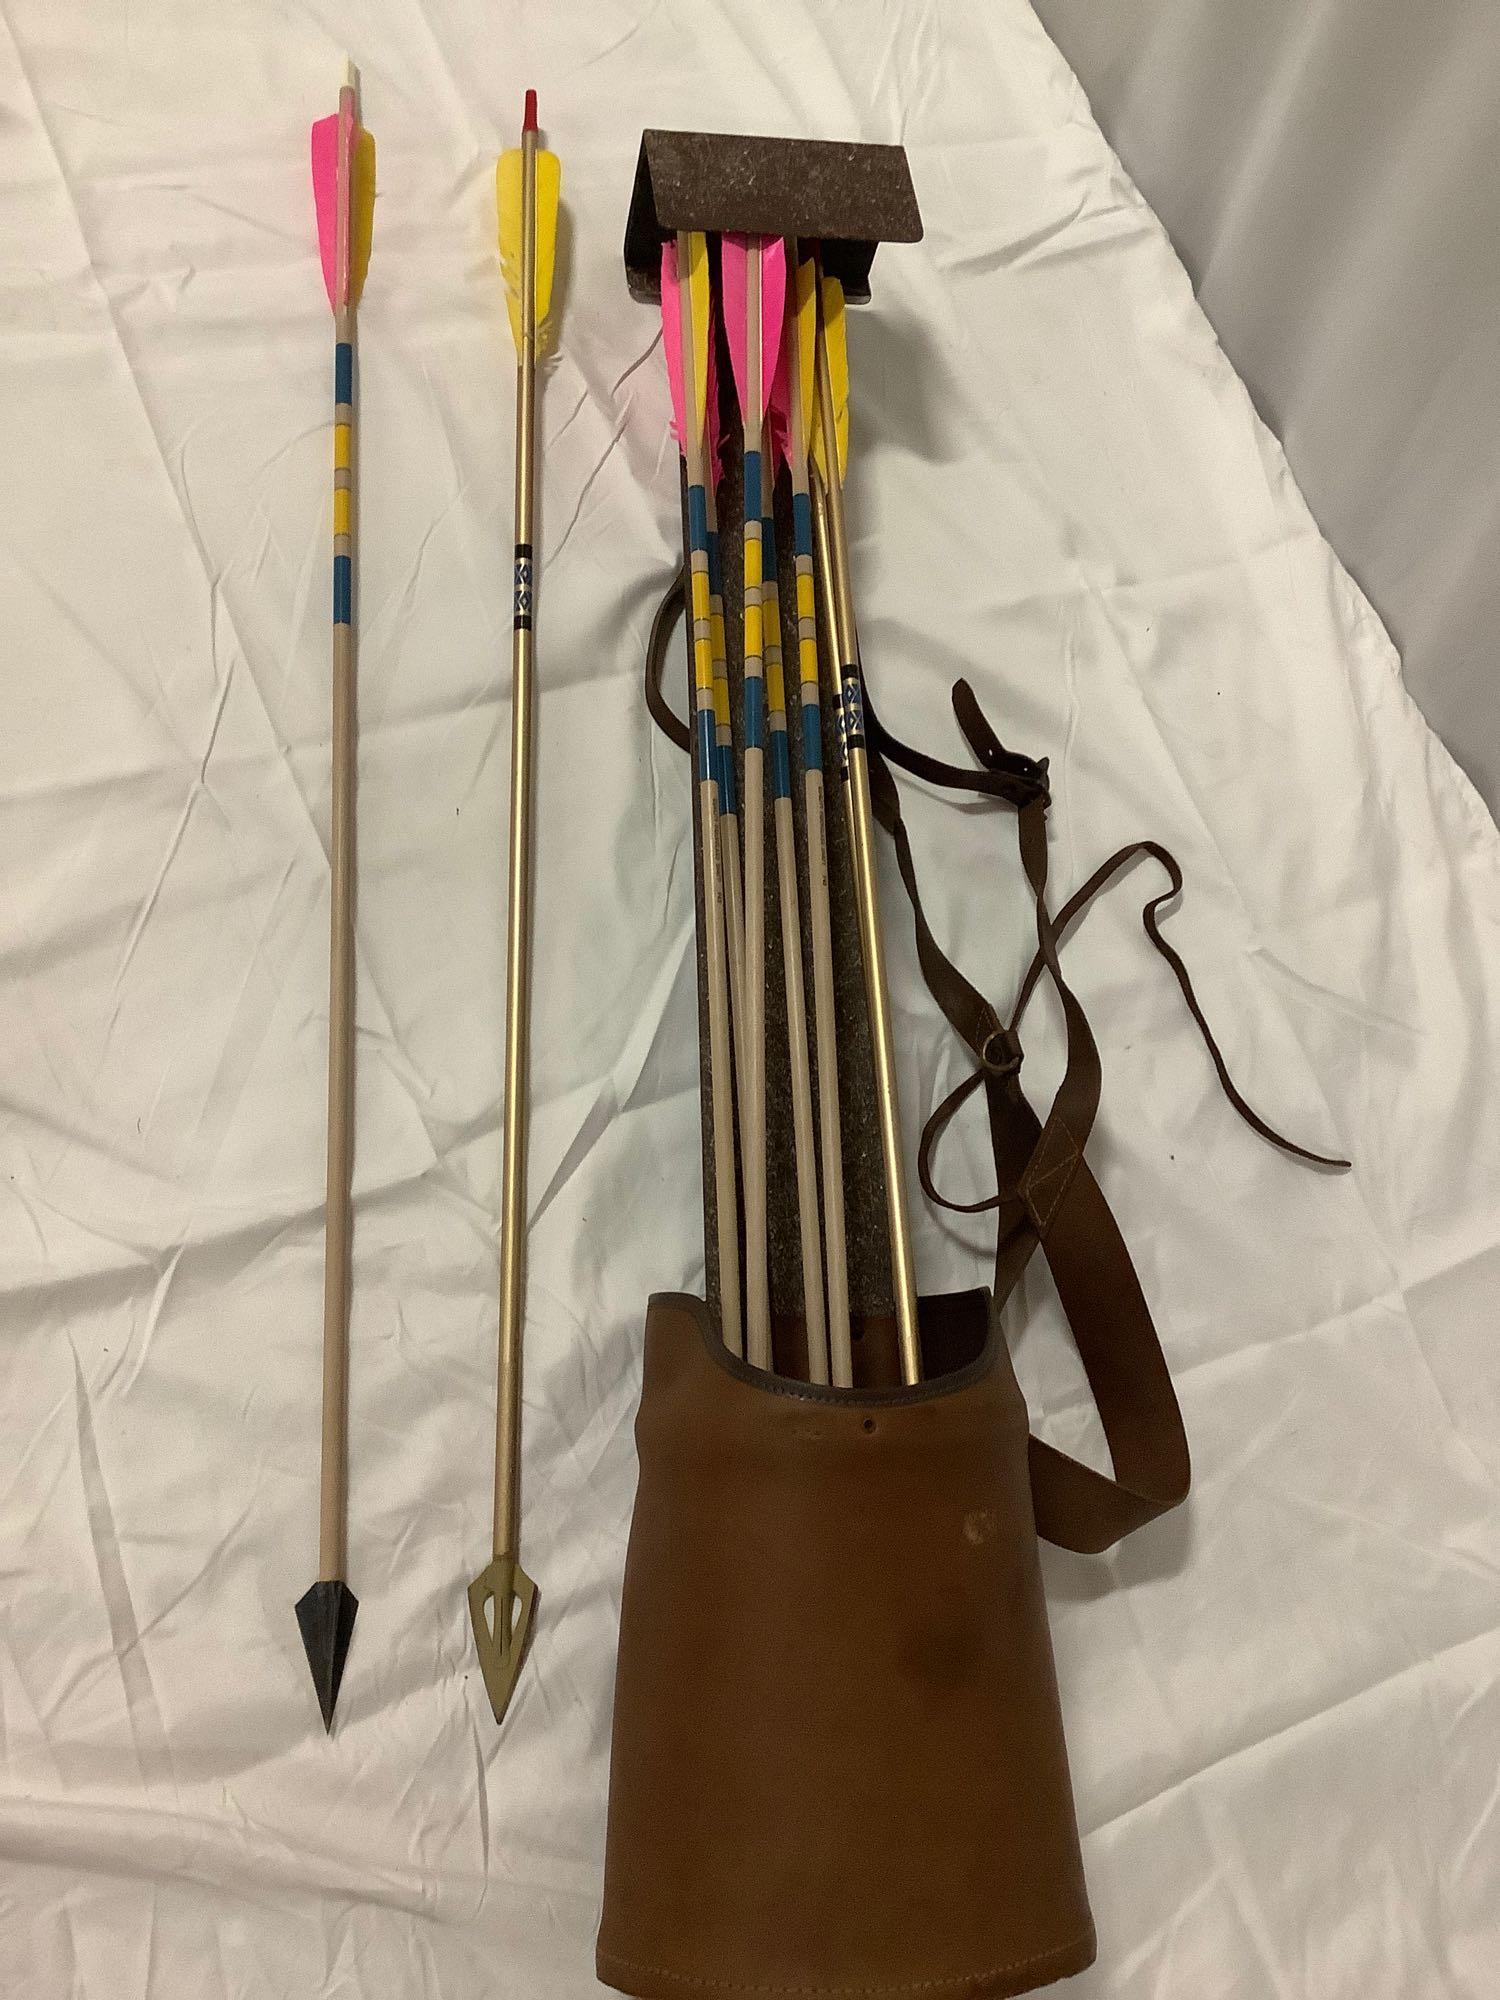 Leather hunting quiver 9 broadhead arrows & Browning - Nomad 45 lb. recurve bow, excellent condition